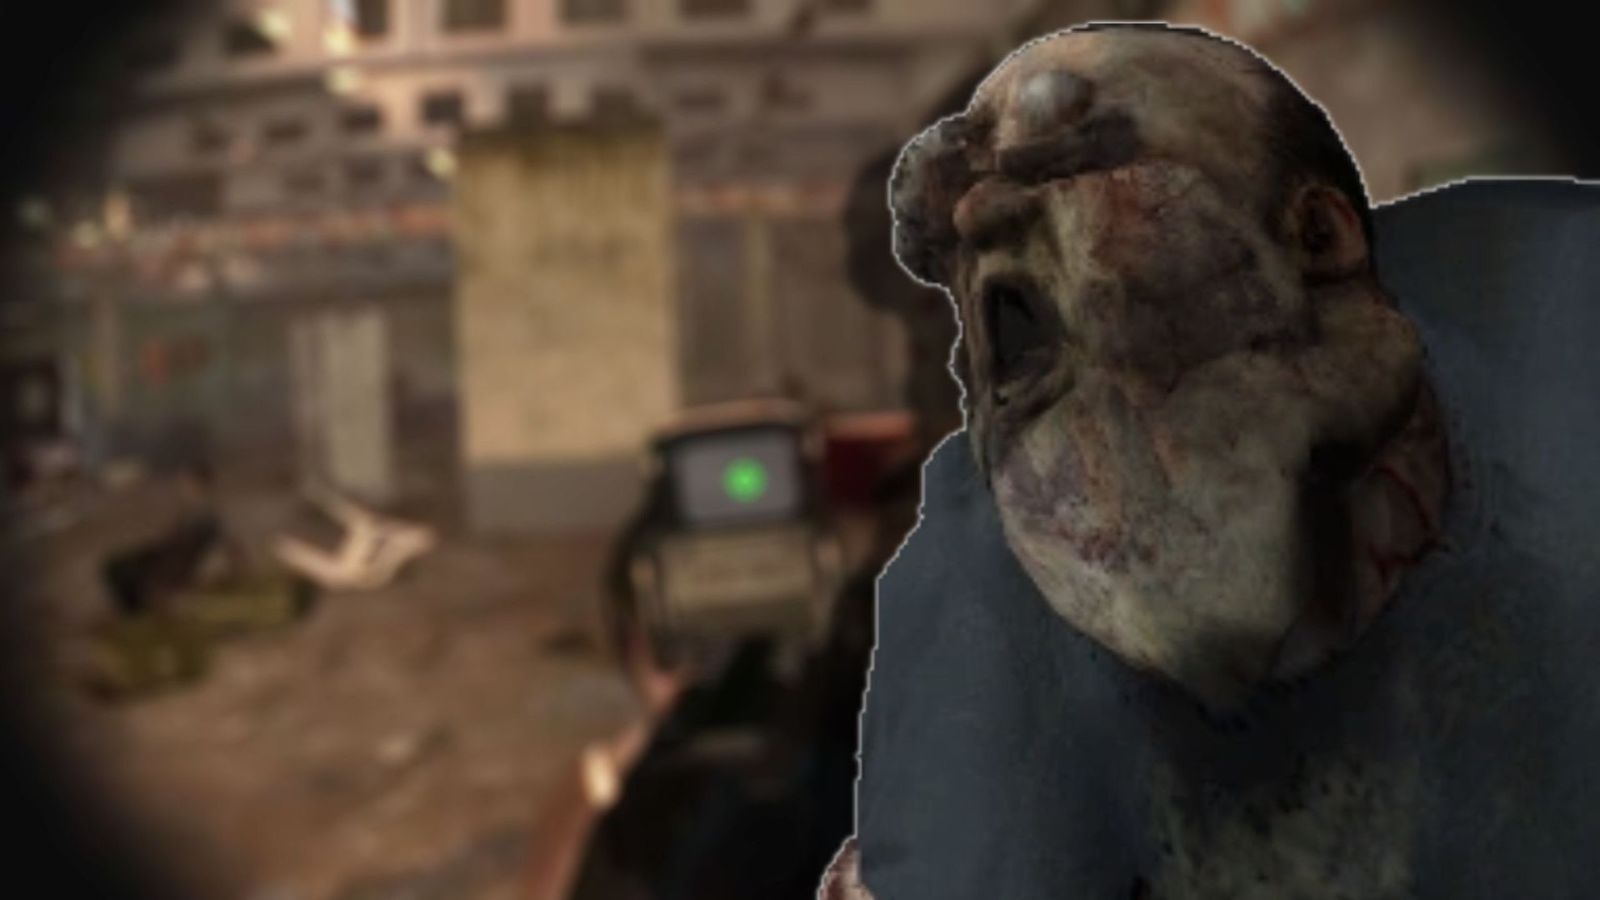 left 4 dead 2 vr mod is the most immersive zombie fps in years